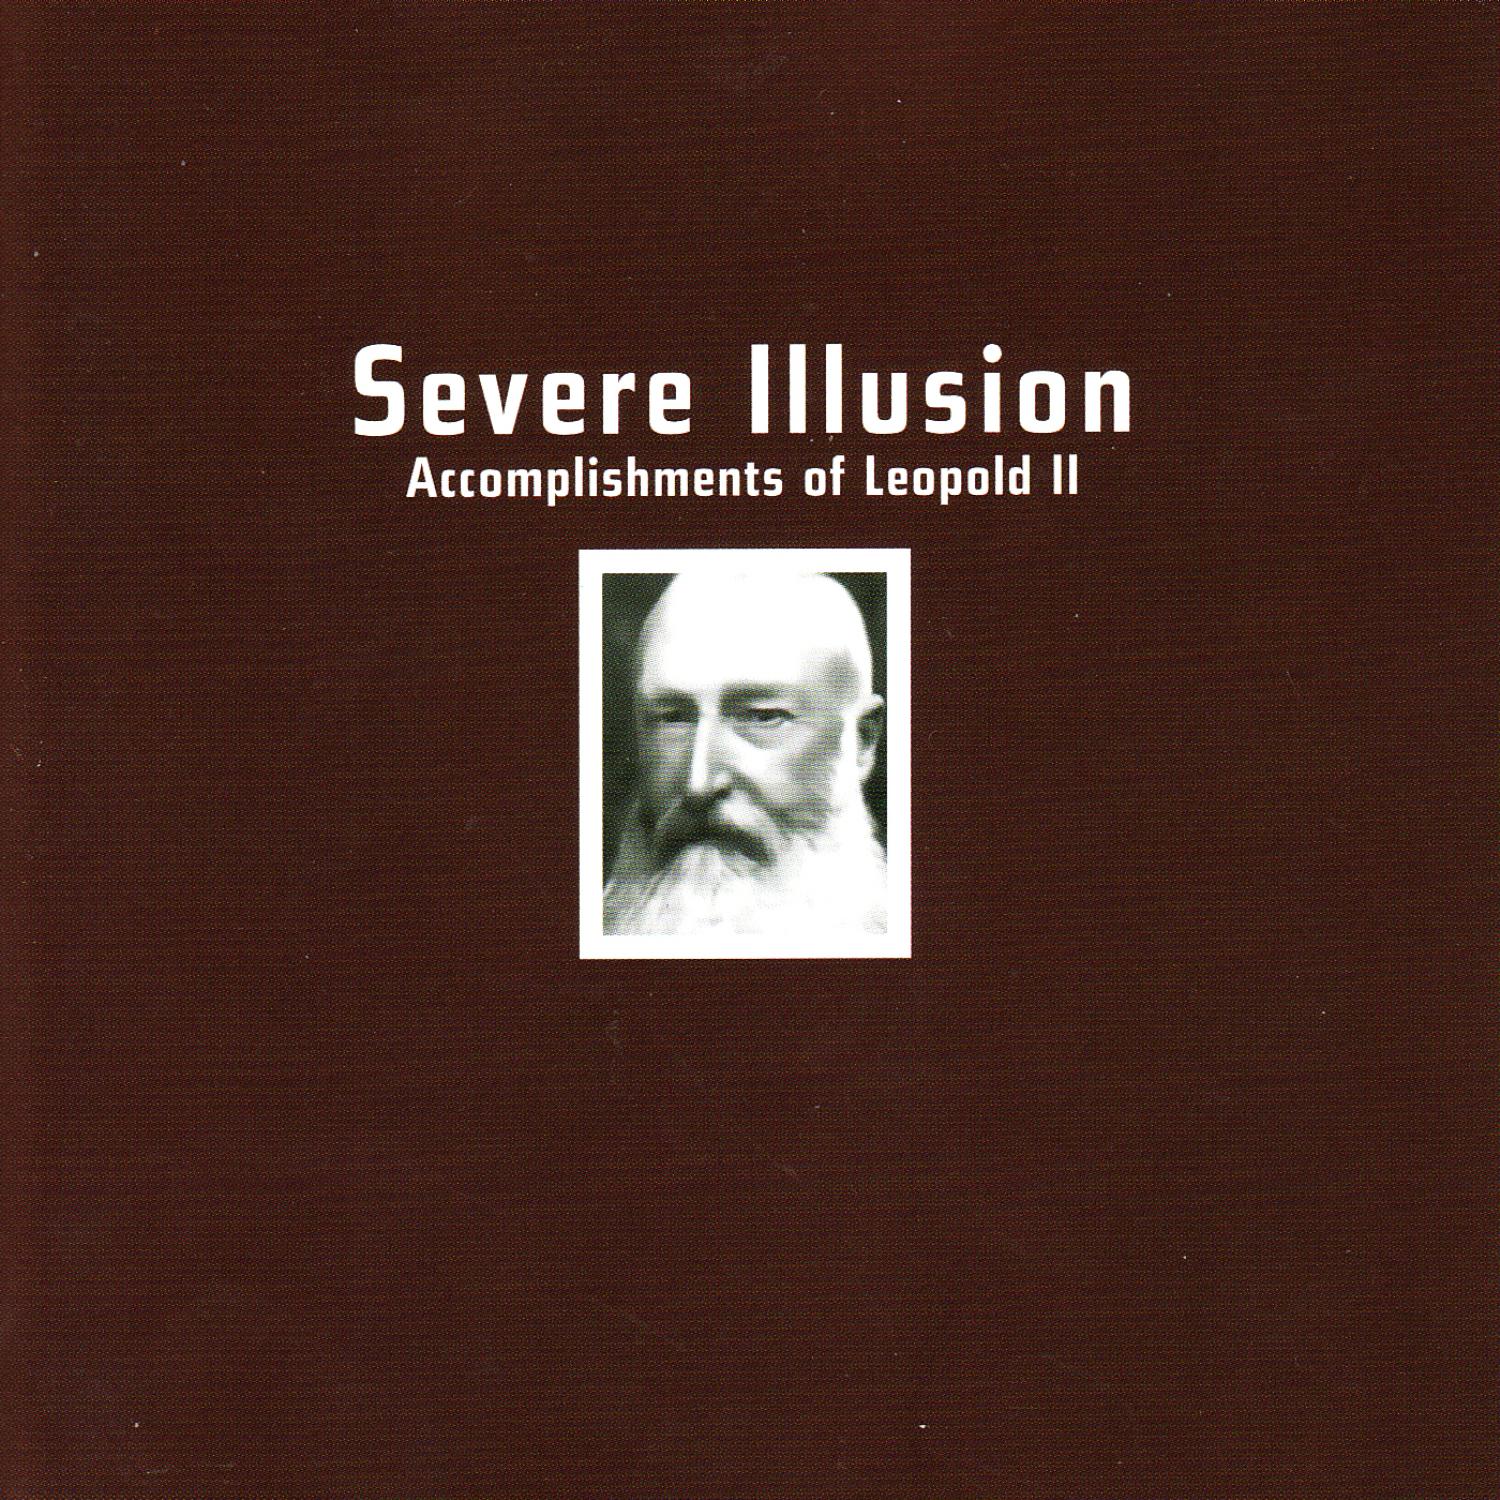 Severe Illusion - The Giant Never Speaks Enough